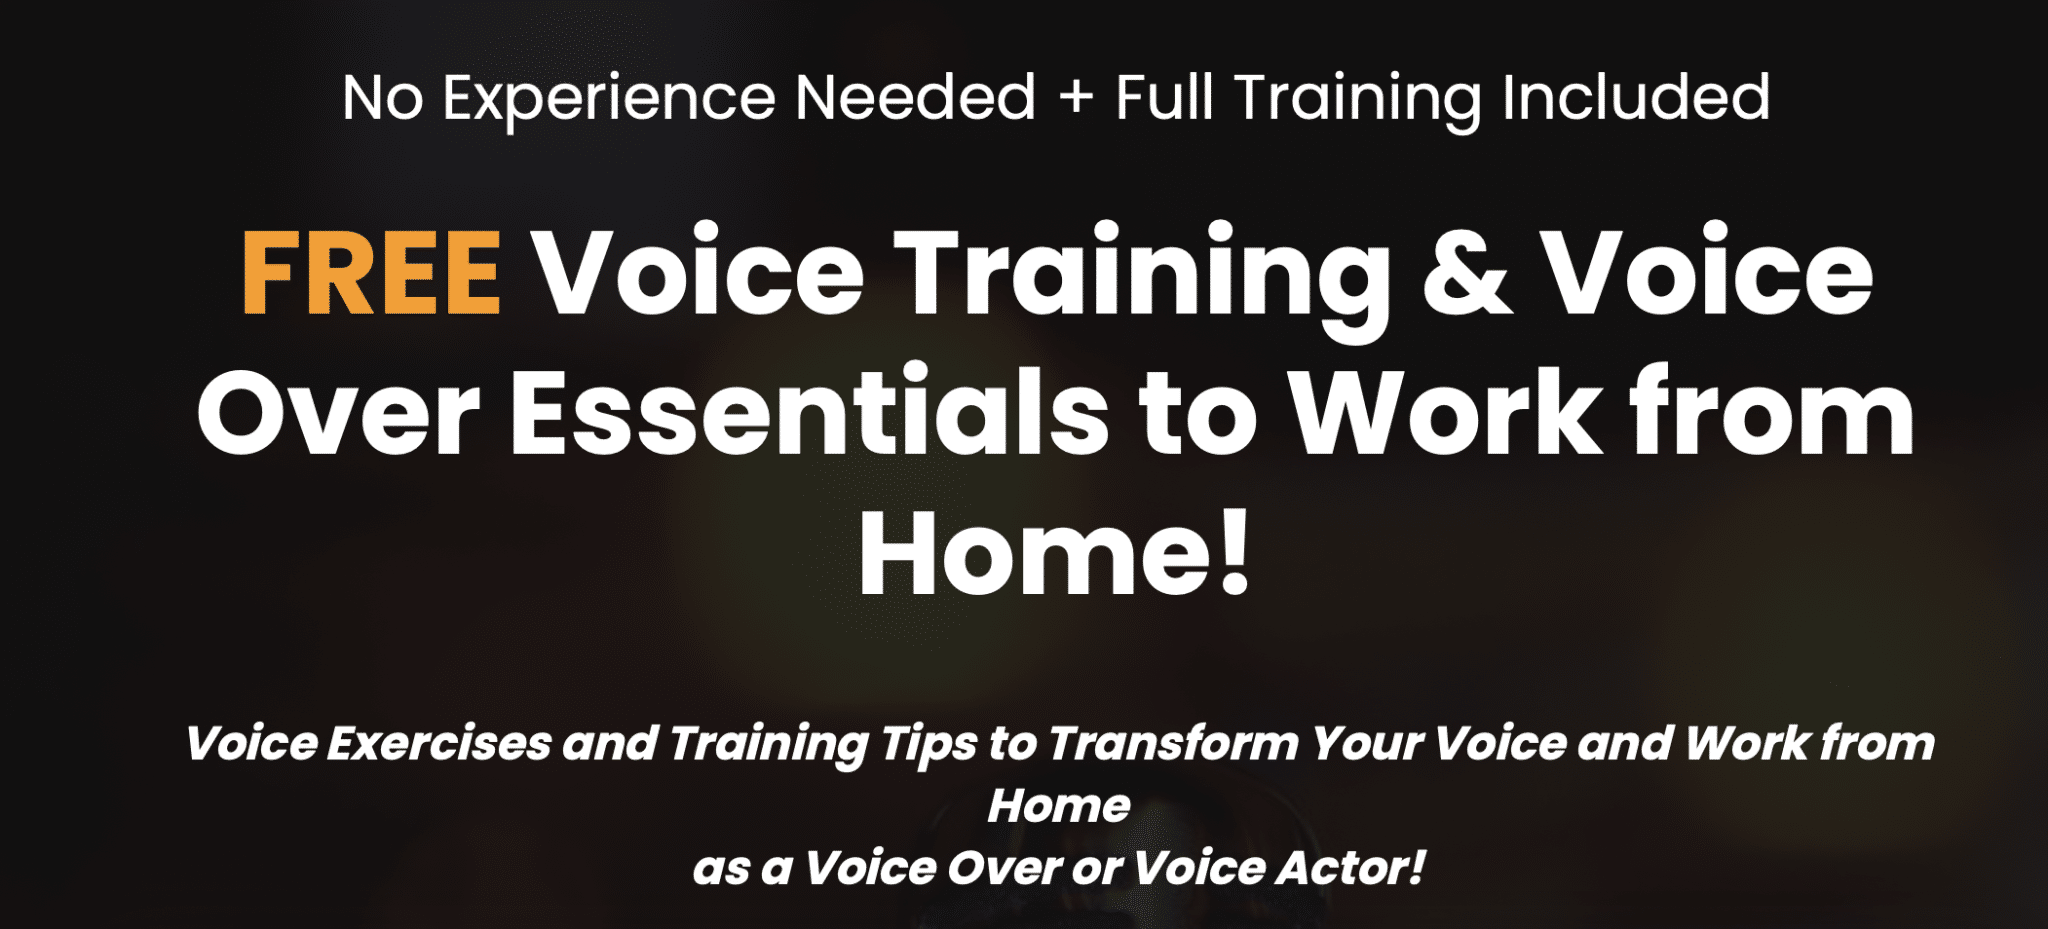 Voice Training & Voice Over Essentials to Work from Home